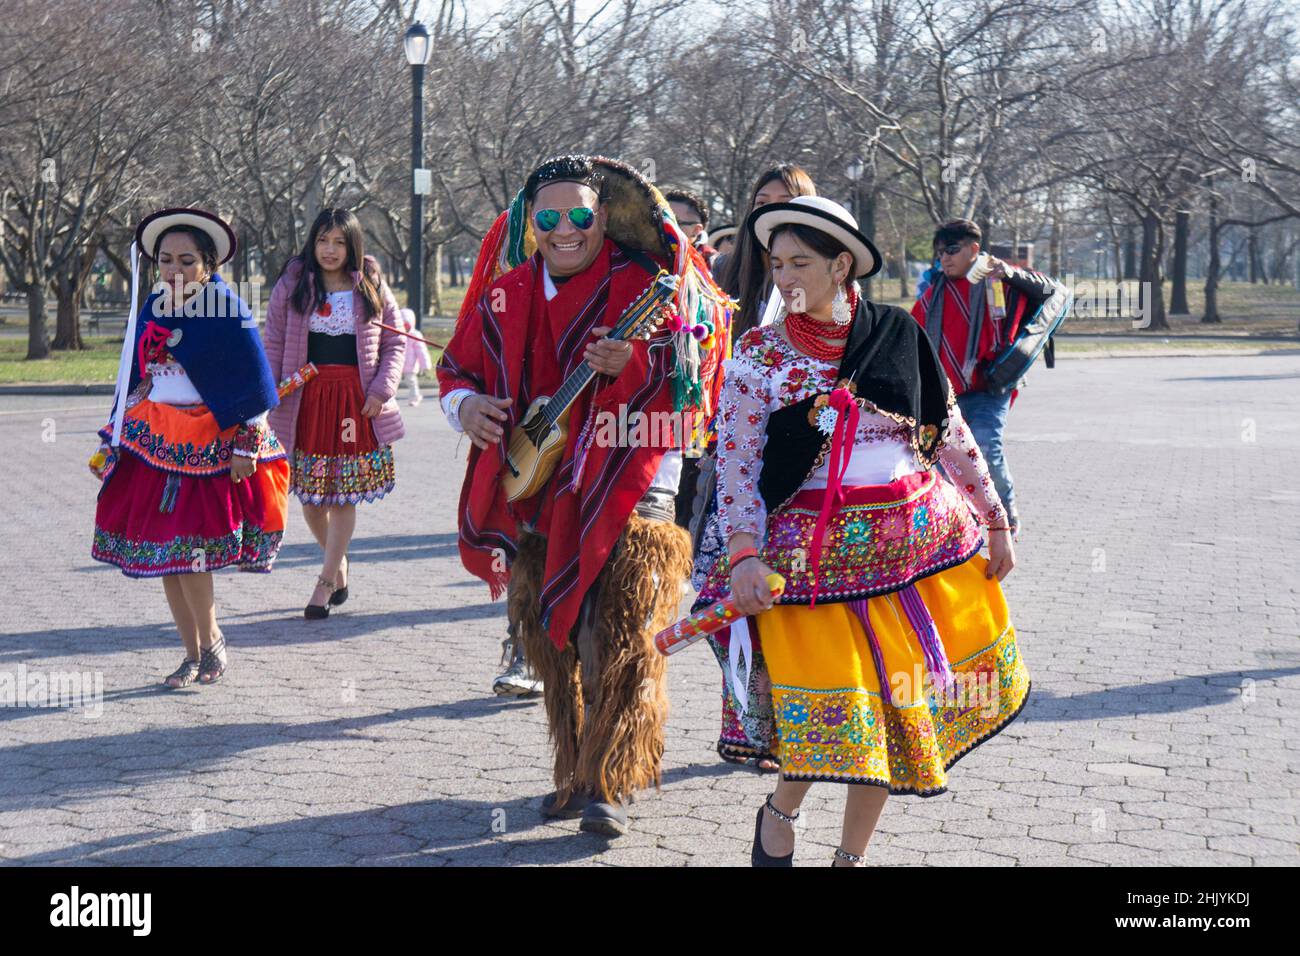 Ecuadorian dancers & musicians perform alongside the Unisphere for a video shoot of their group. In Queens, New York City. Stock Photo